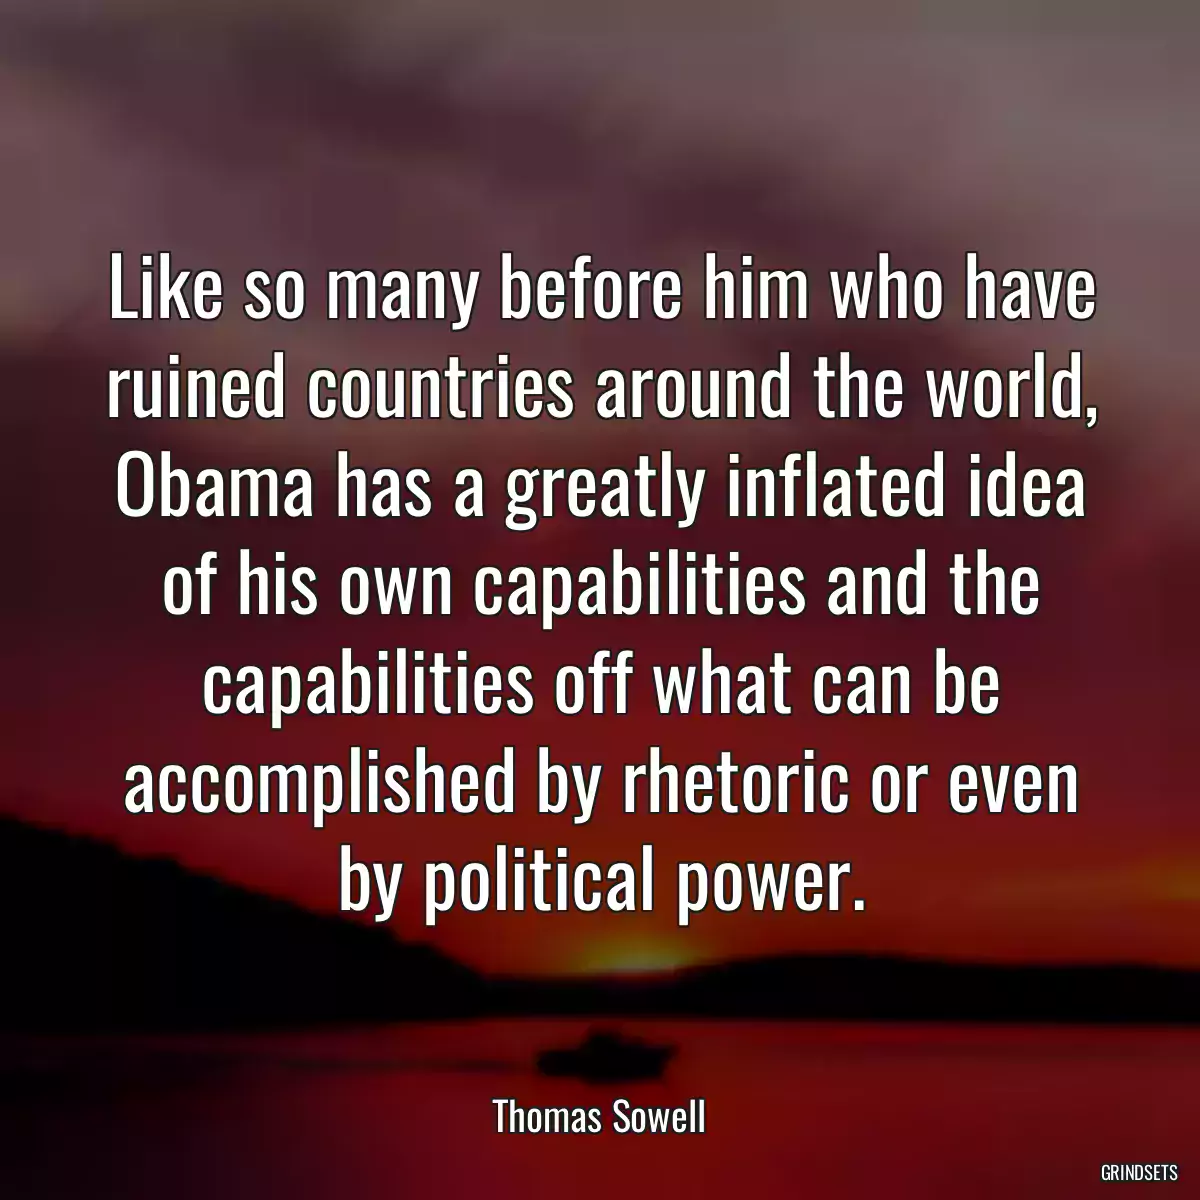 Like so many before him who have ruined countries around the world, Obama has a greatly inflated idea of his own capabilities and the capabilities off what can be accomplished by rhetoric or even by political power.